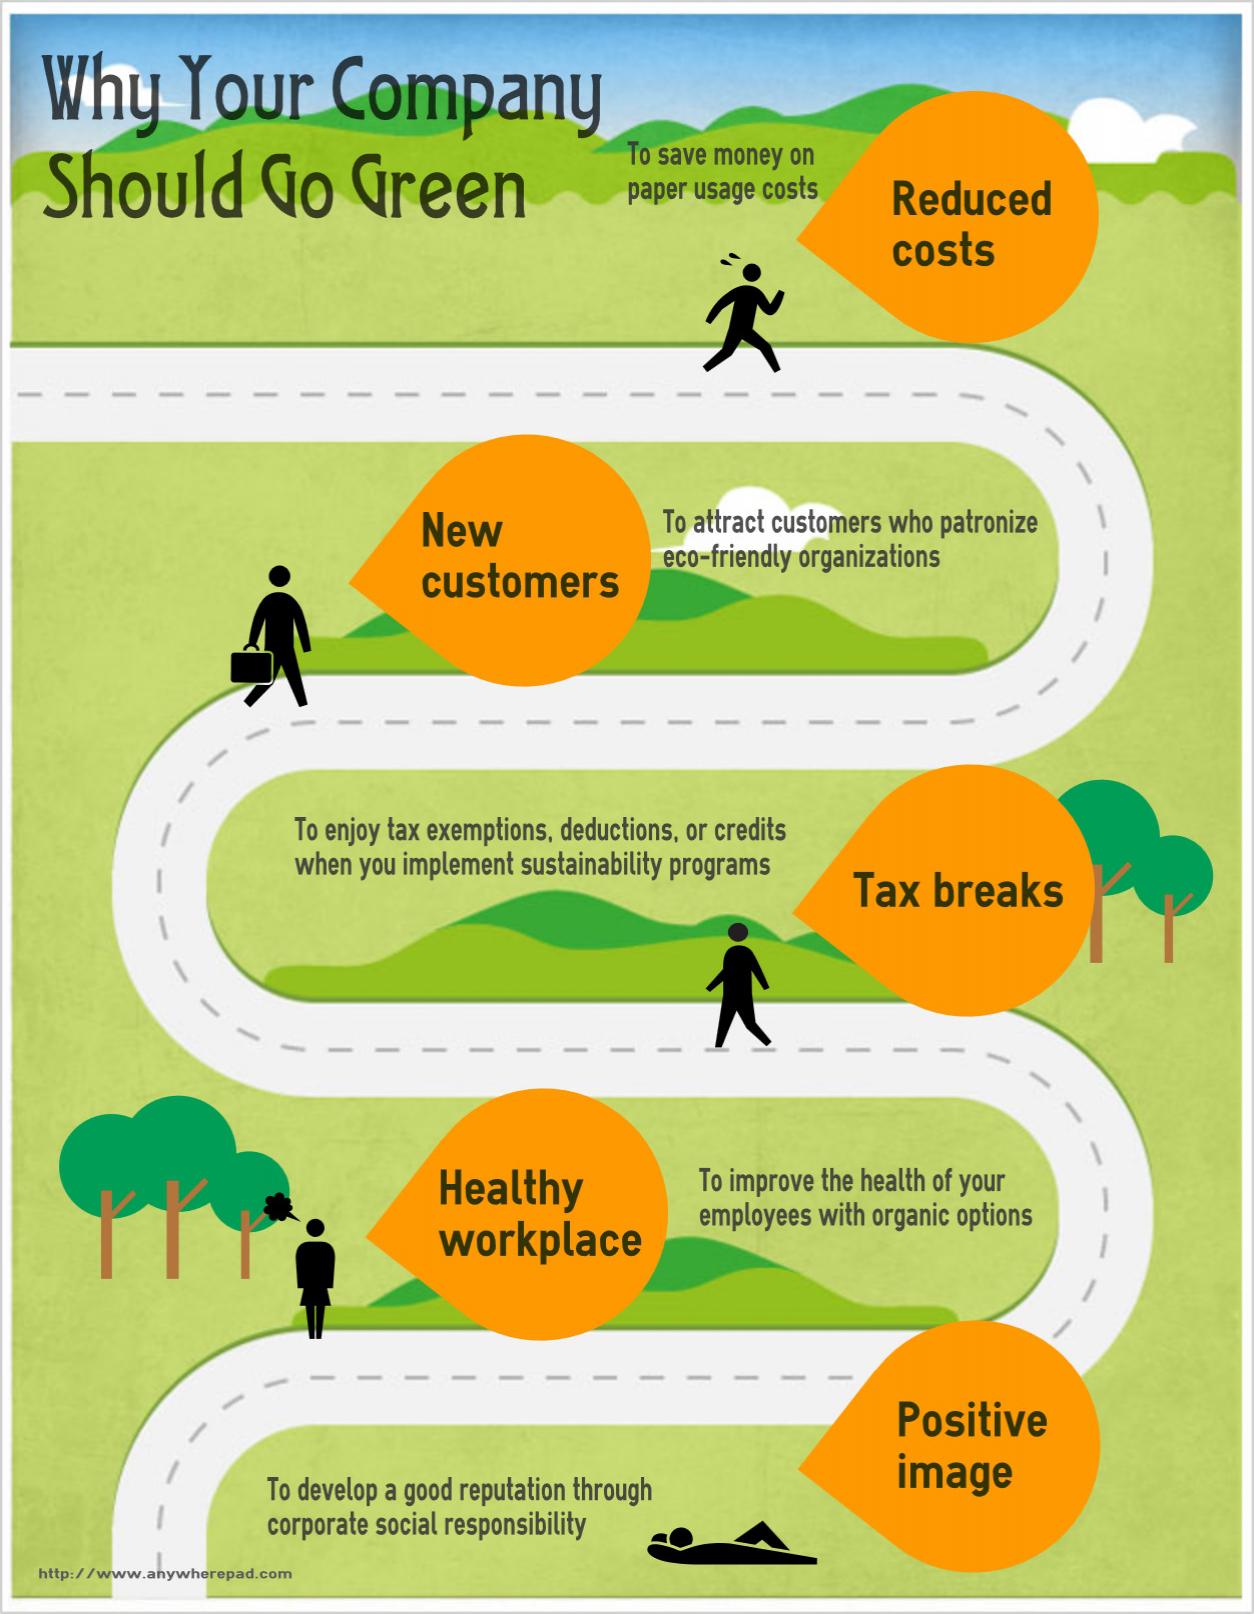 Why Your Company Should Go Green | Azeus Convene